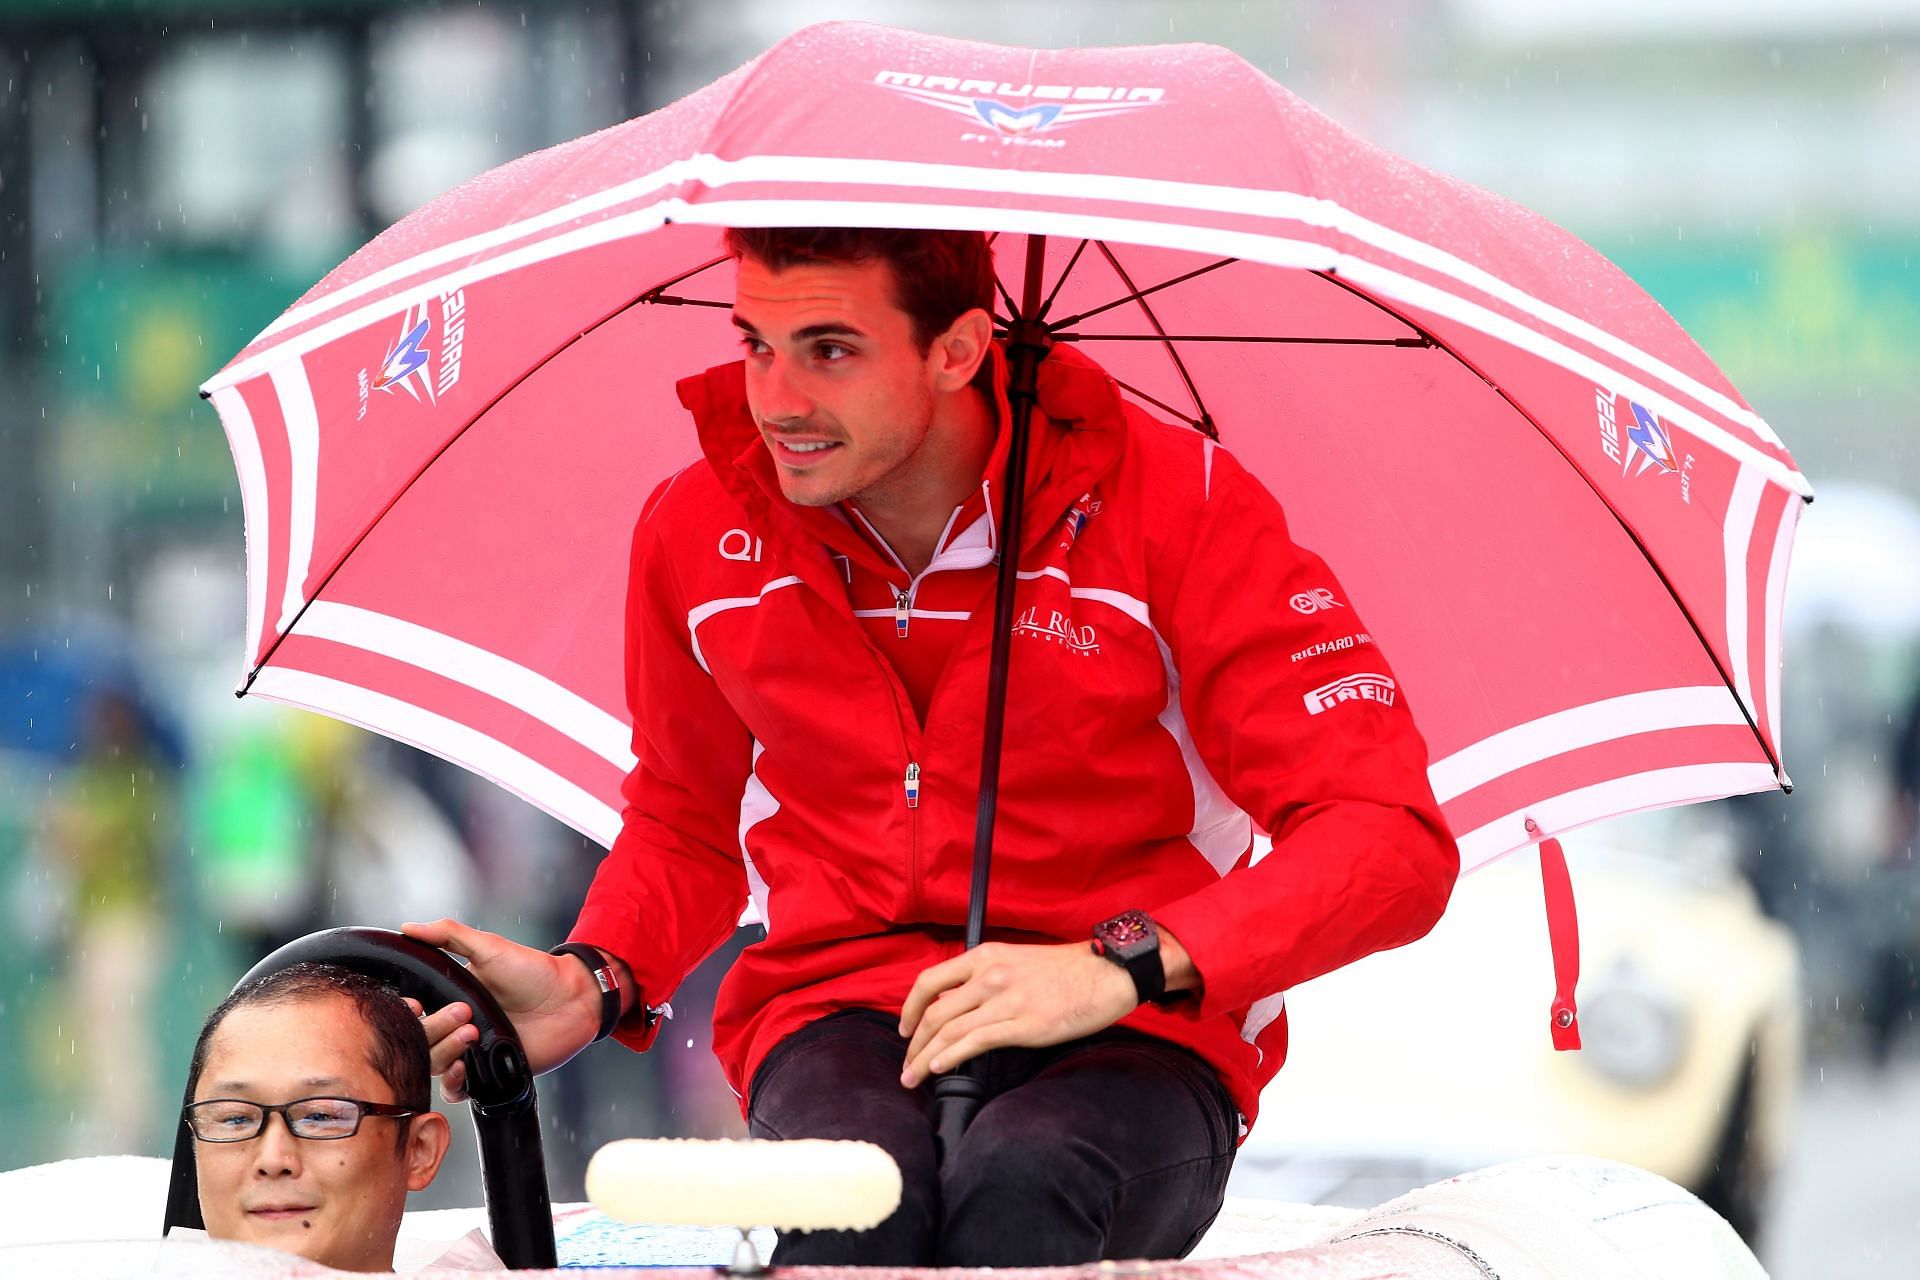 Bianchi at the F1 Grand Prix of Japan (Image via Getty)